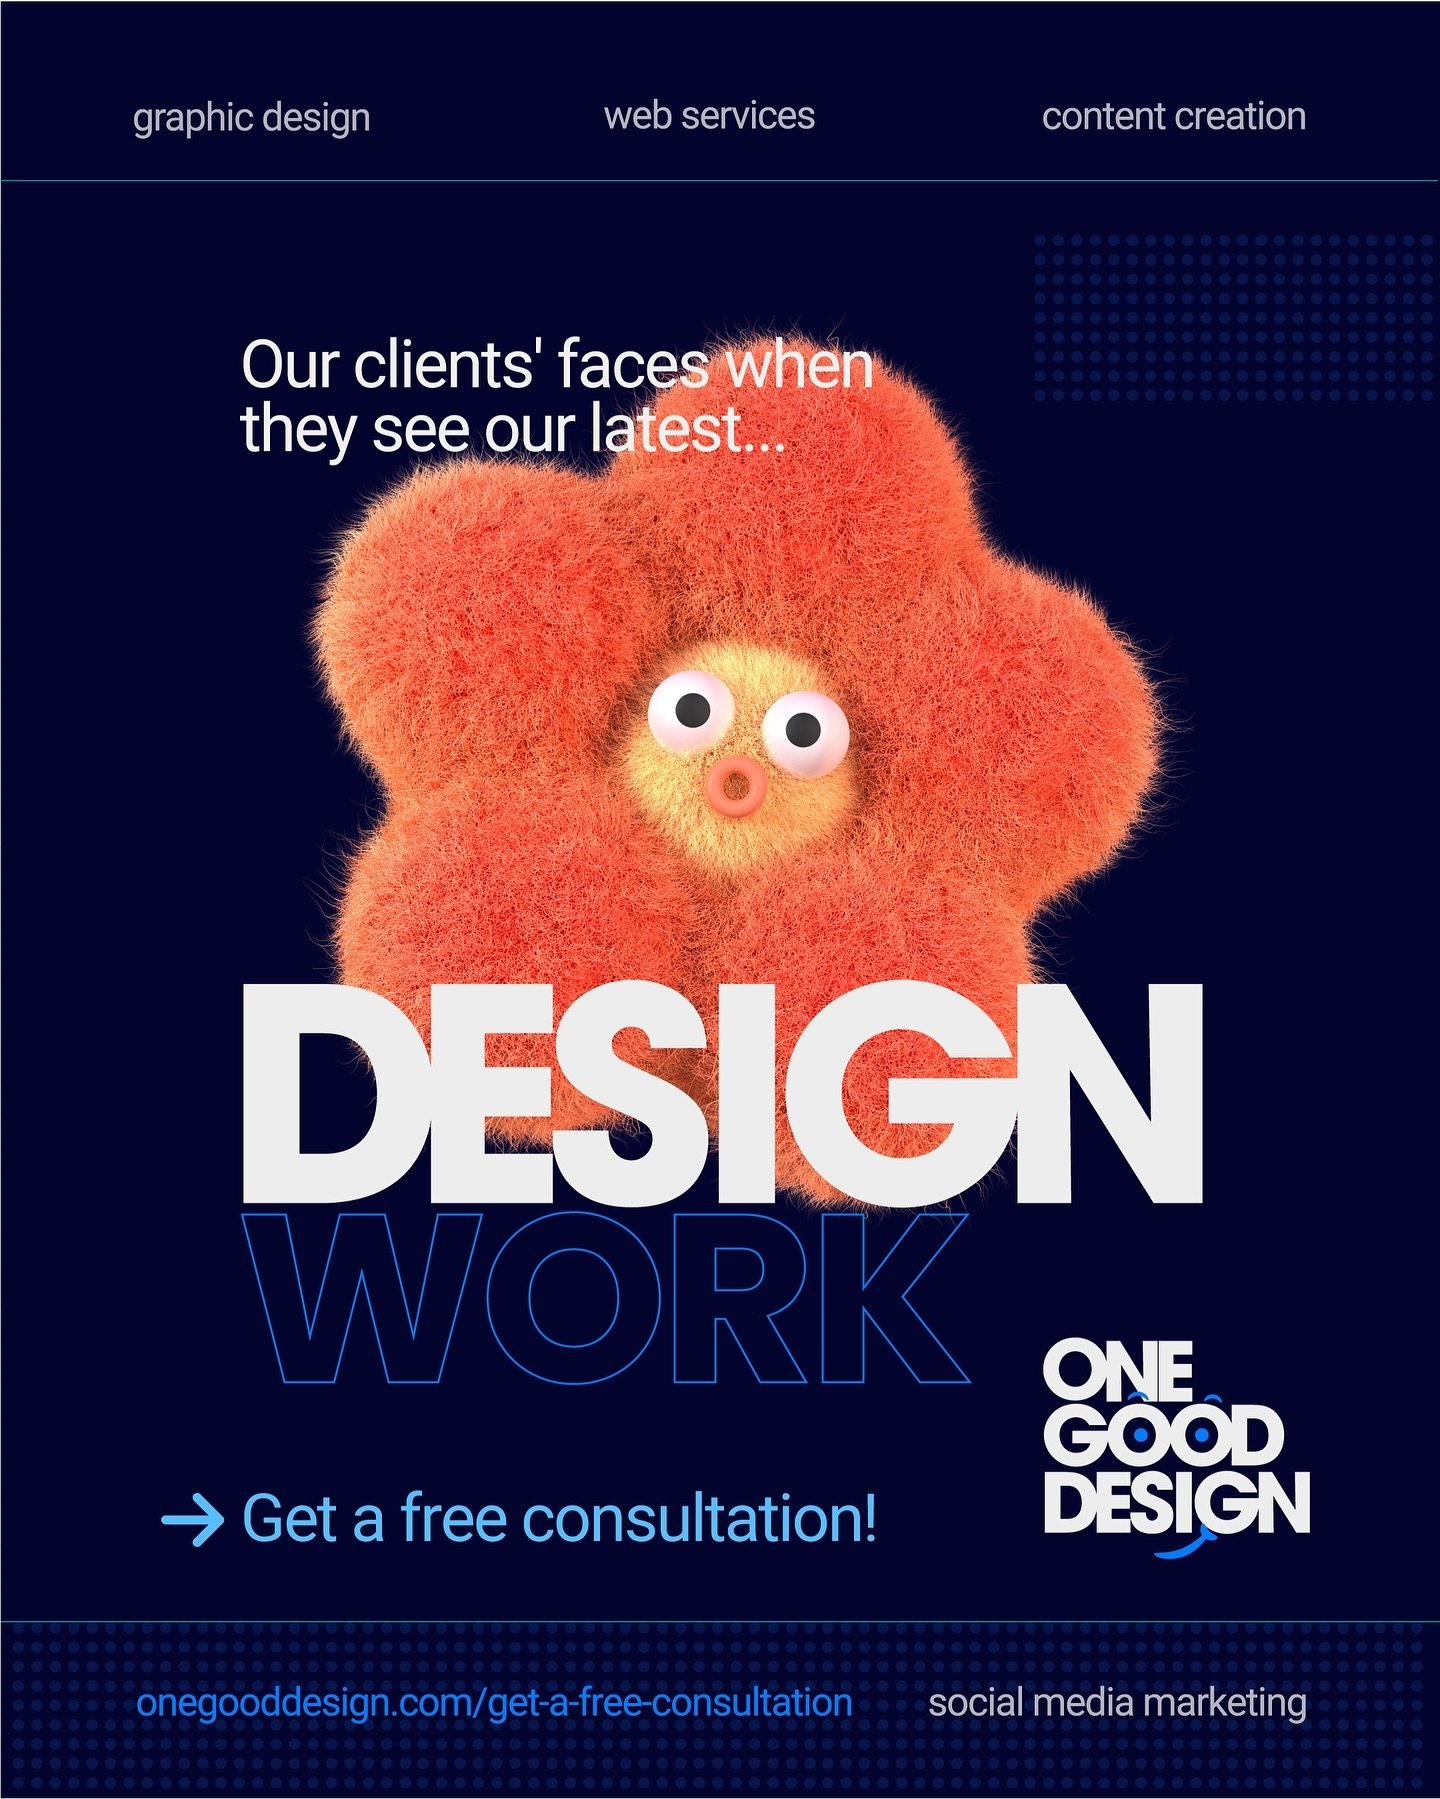 We love seeing our clients&rsquo; reactions to our work&mdash;it&rsquo;s always a &lsquo;wow&rsquo; moment! 🚀 Want to be next? Click the link in bio for a free consultation and let&rsquo;s create something amazing together! 

#OneGoodDesign #Graphic